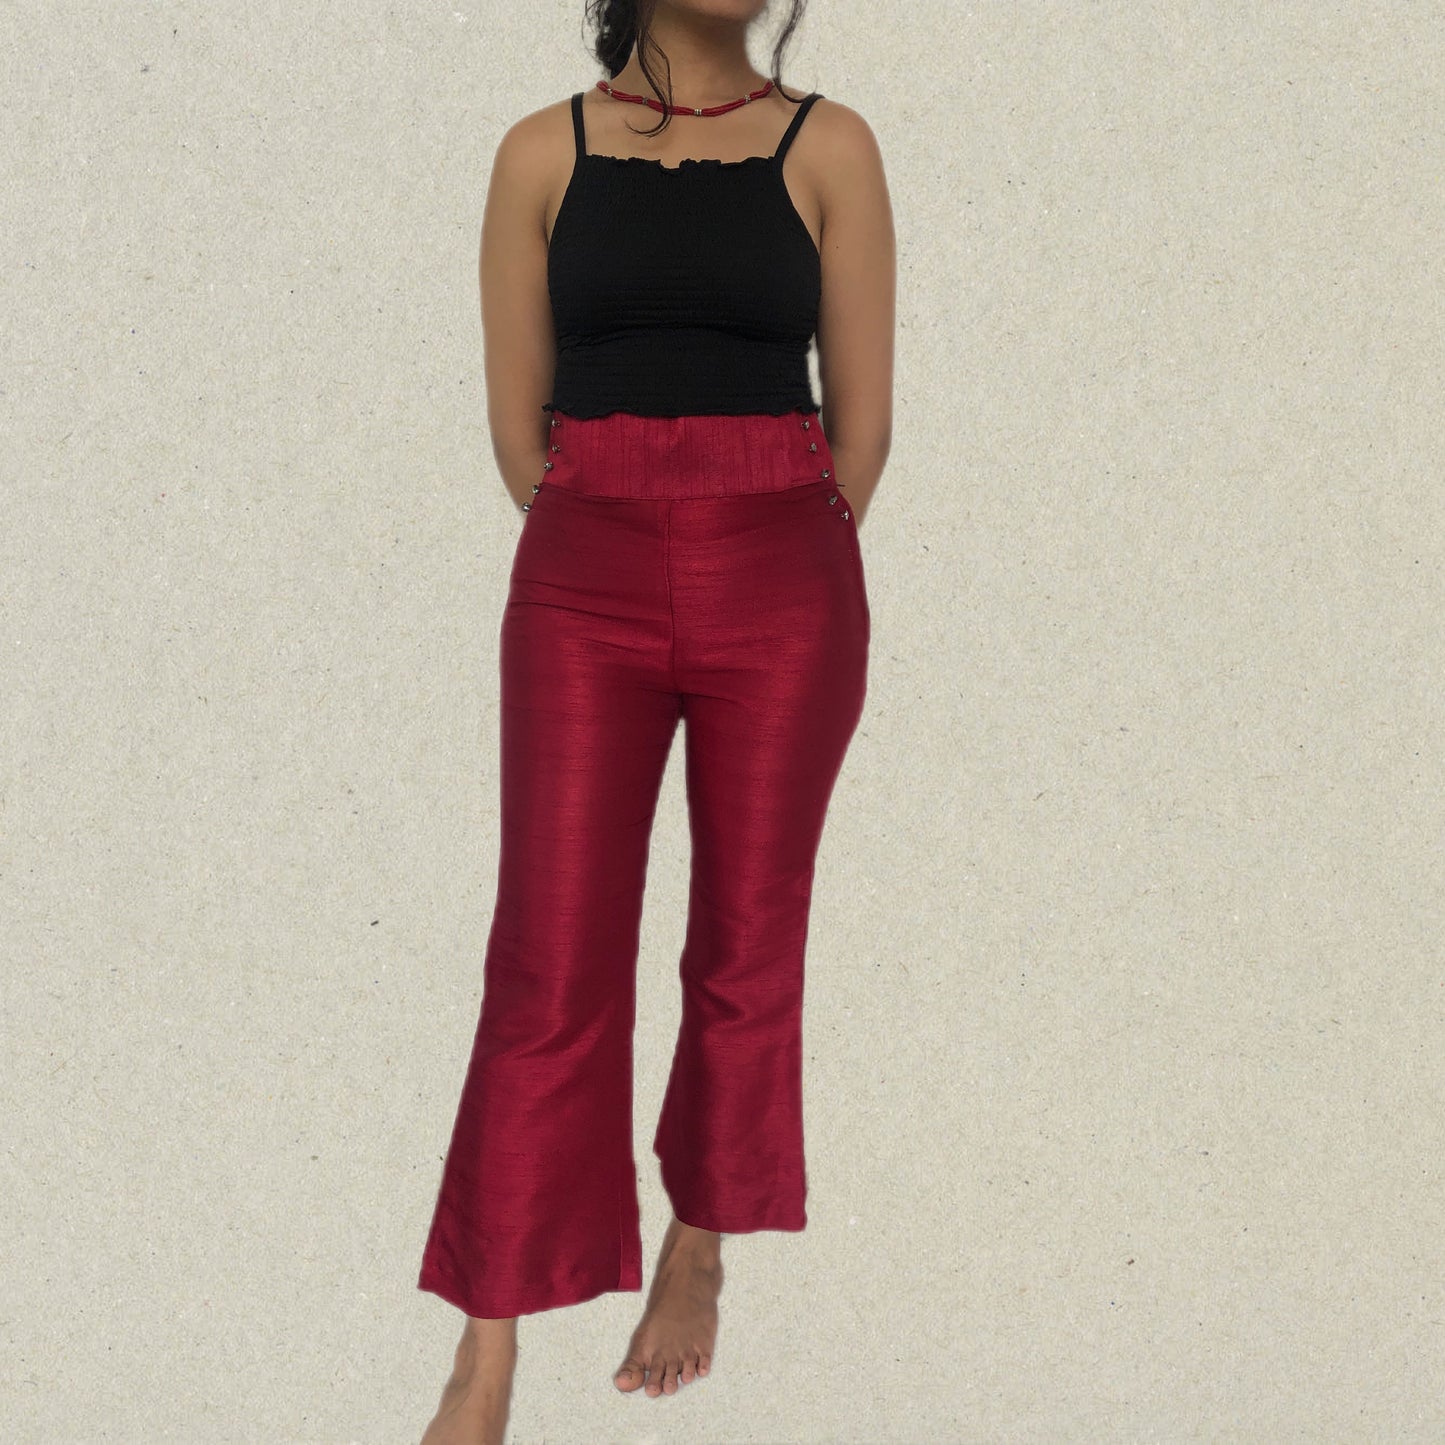 Red bootcut pants